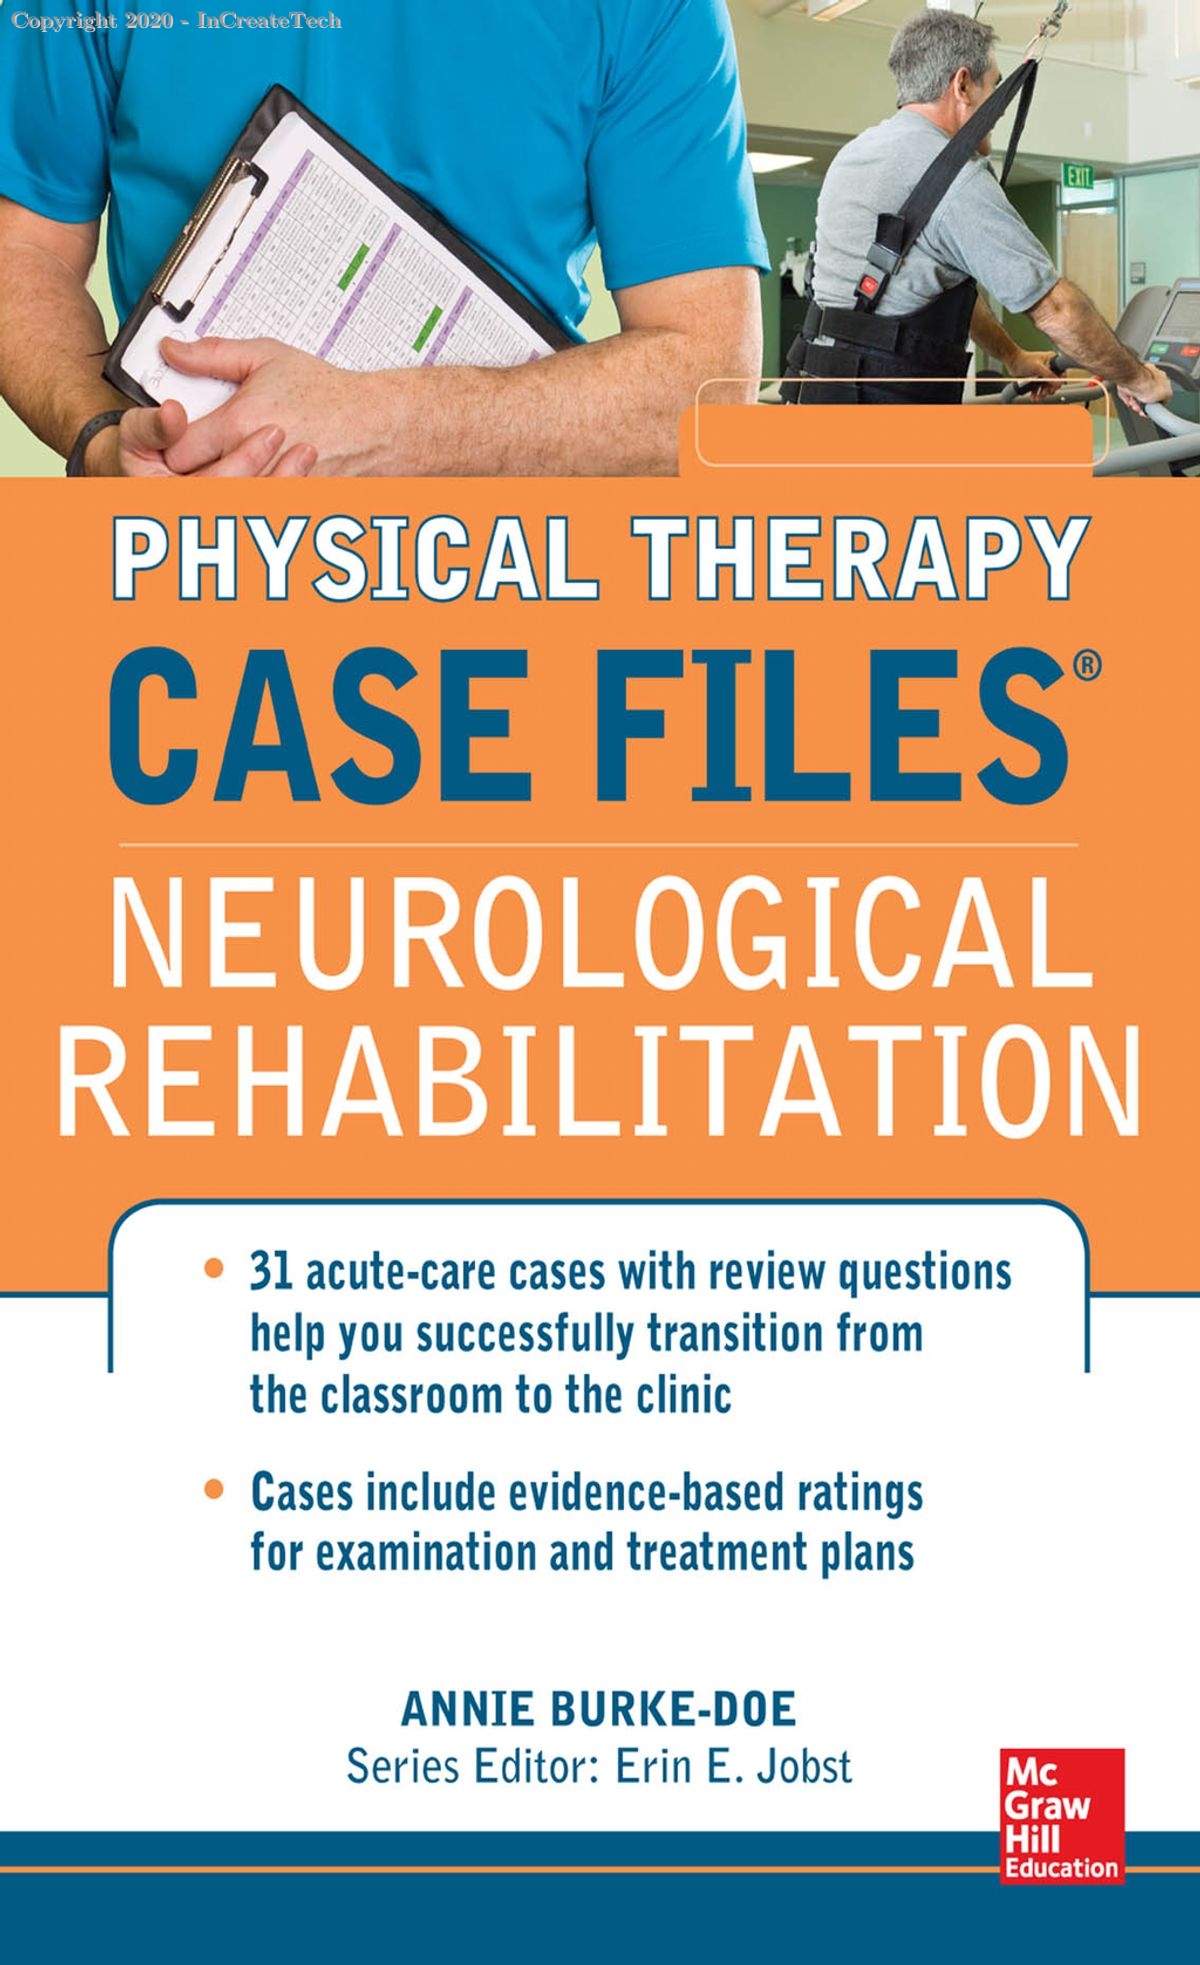 case file Physical Therapy Neurological Rehabilitation